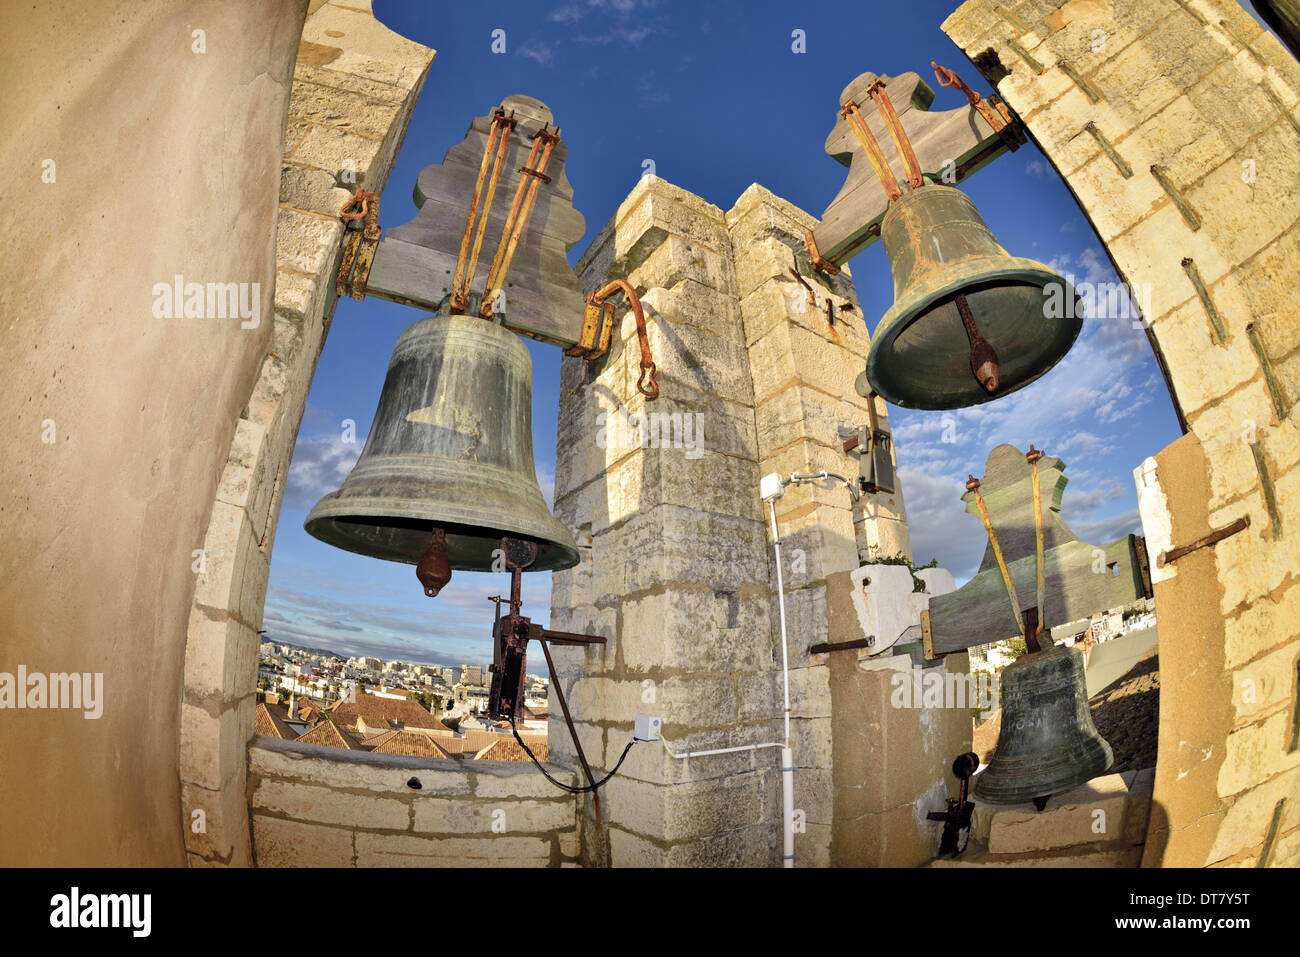 Portugal, Algarve, Faro, Cathedral, Se Catedral, Cathedral of Faro, bell tower, three bells, medieval, middle-aged, travel, tourism, sightseeing, catholic church, panoramic view, Nikon fisheye lens, 16mm, travel destinies in Portugal, verbal authorized, ci Stock Photo